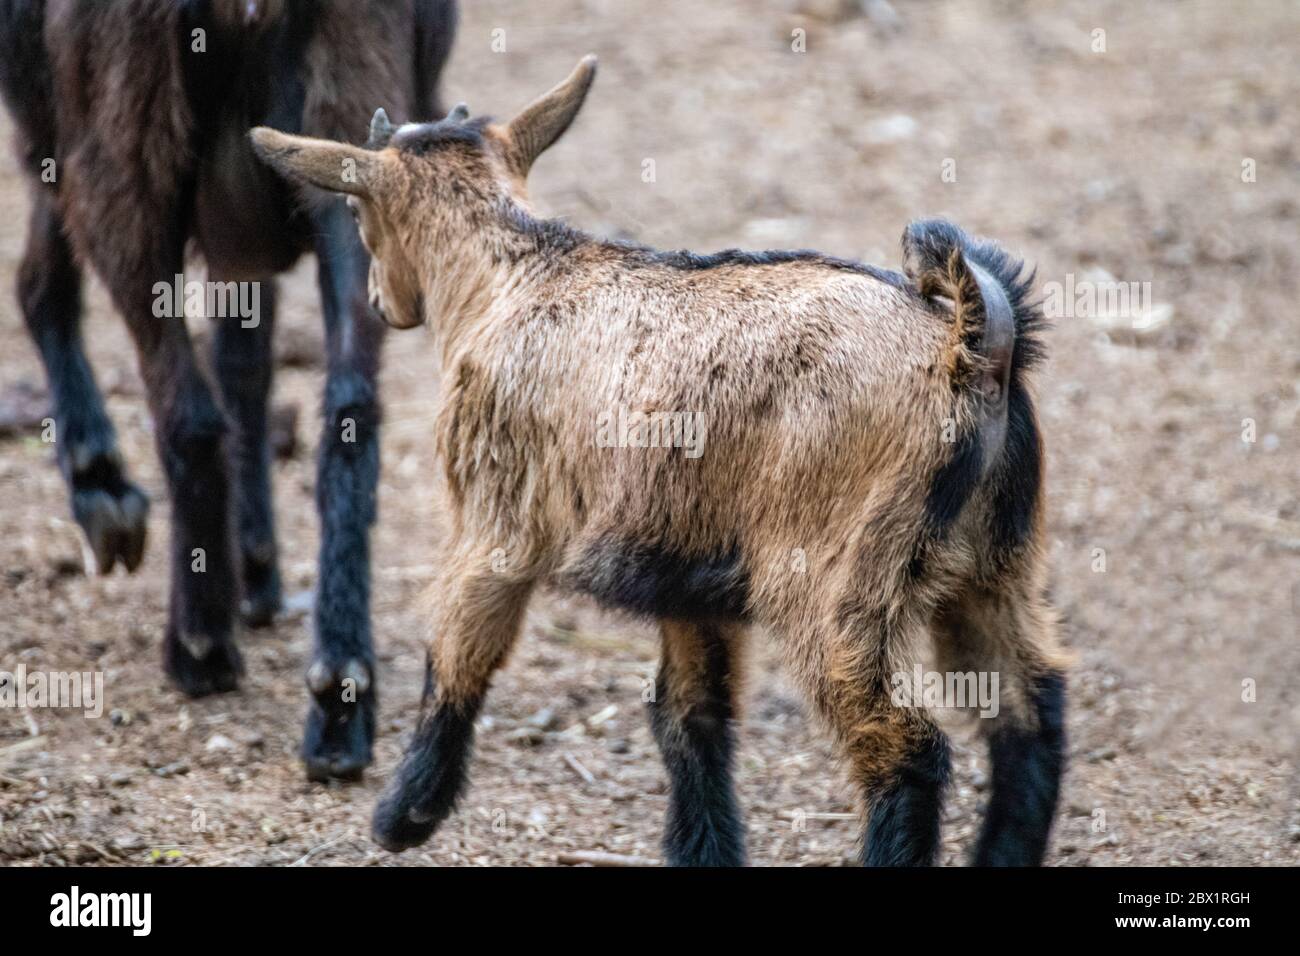 A cute playful baby brown goat walking after his mother in an animal farm yard Stock Photo